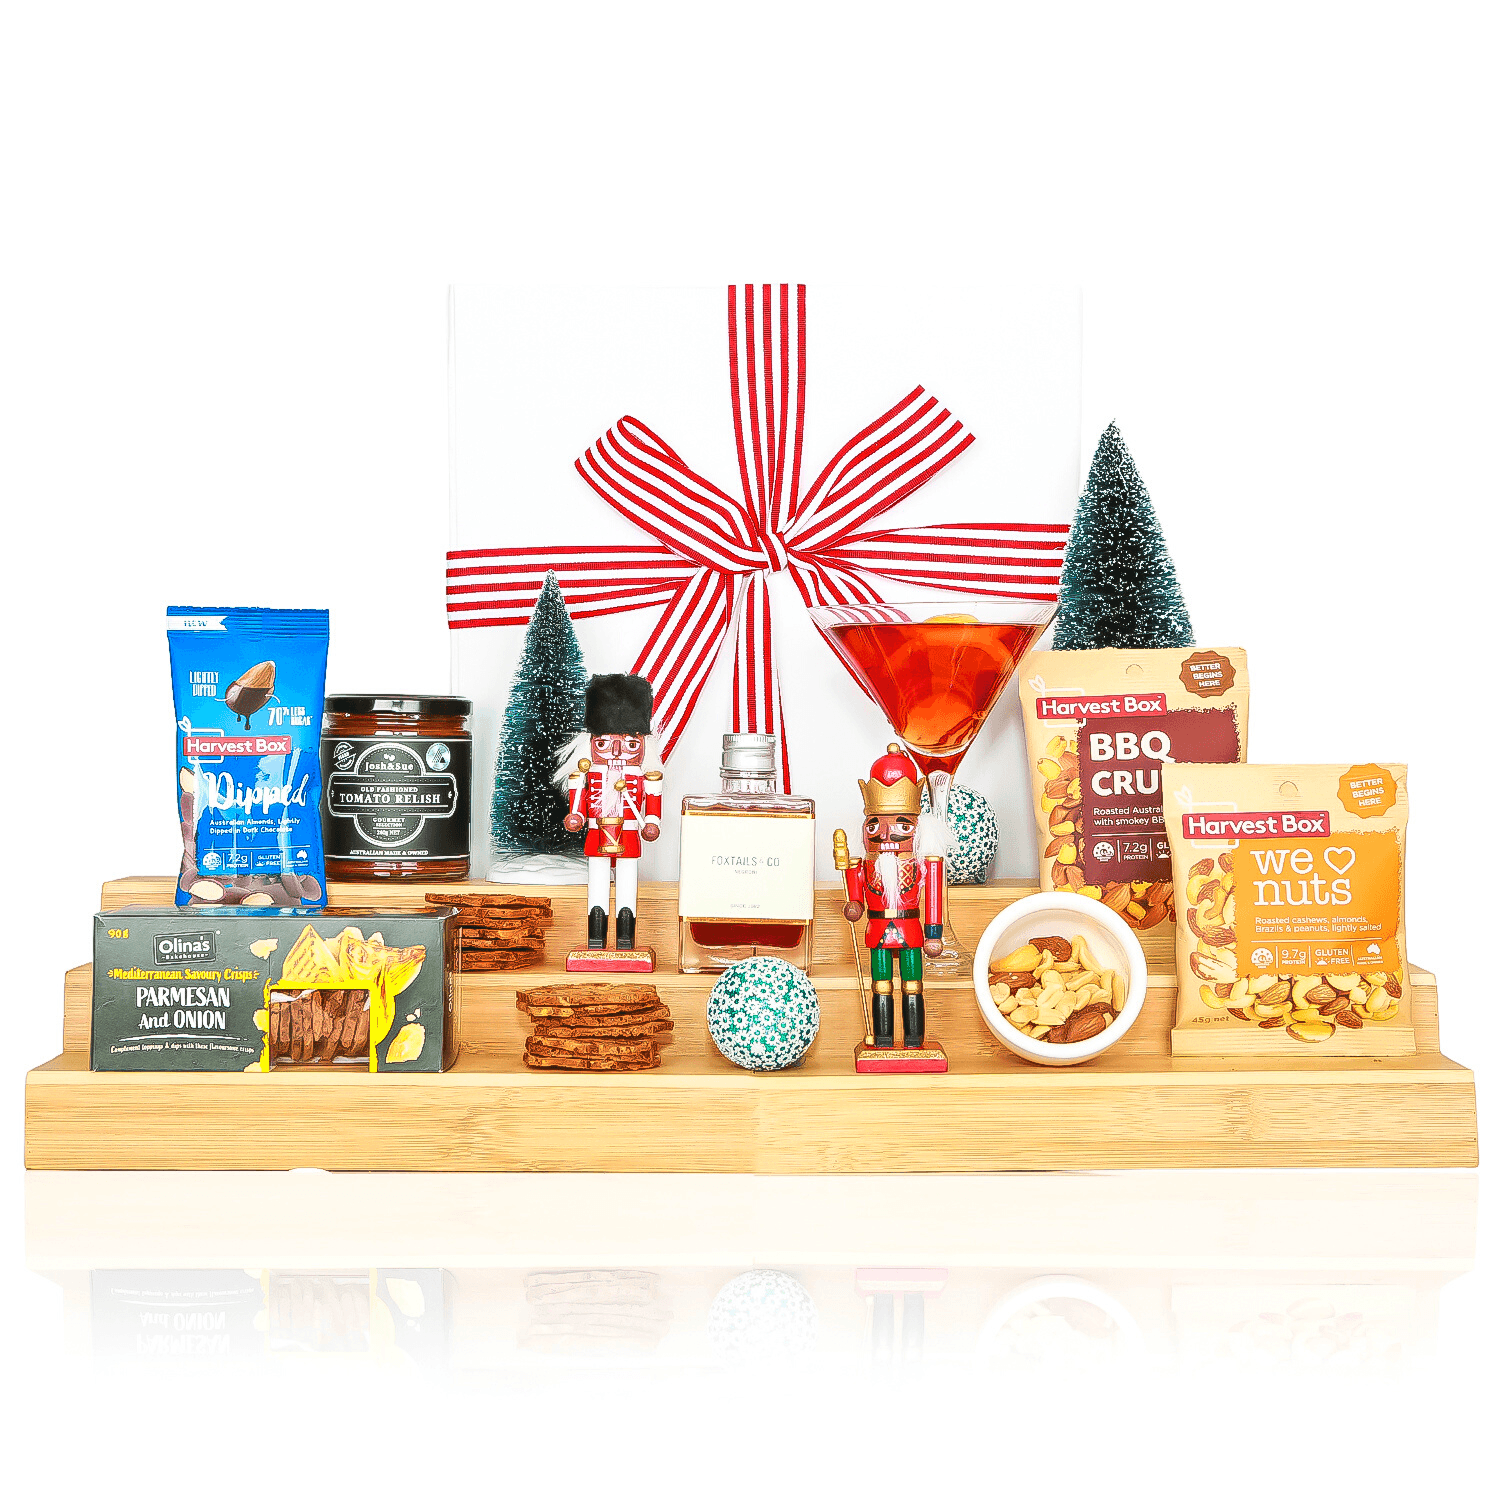 Christmas Cocktails - Healthy Belly Hampers - pure indulgence - birthday hampers - gift hampers - gift hampers melbourne - gift hampers australia - organic hampers -vegan hampers - gluten free hampers - birthday hampers -anniversary hampers - wedding hampers - alcohol hampers